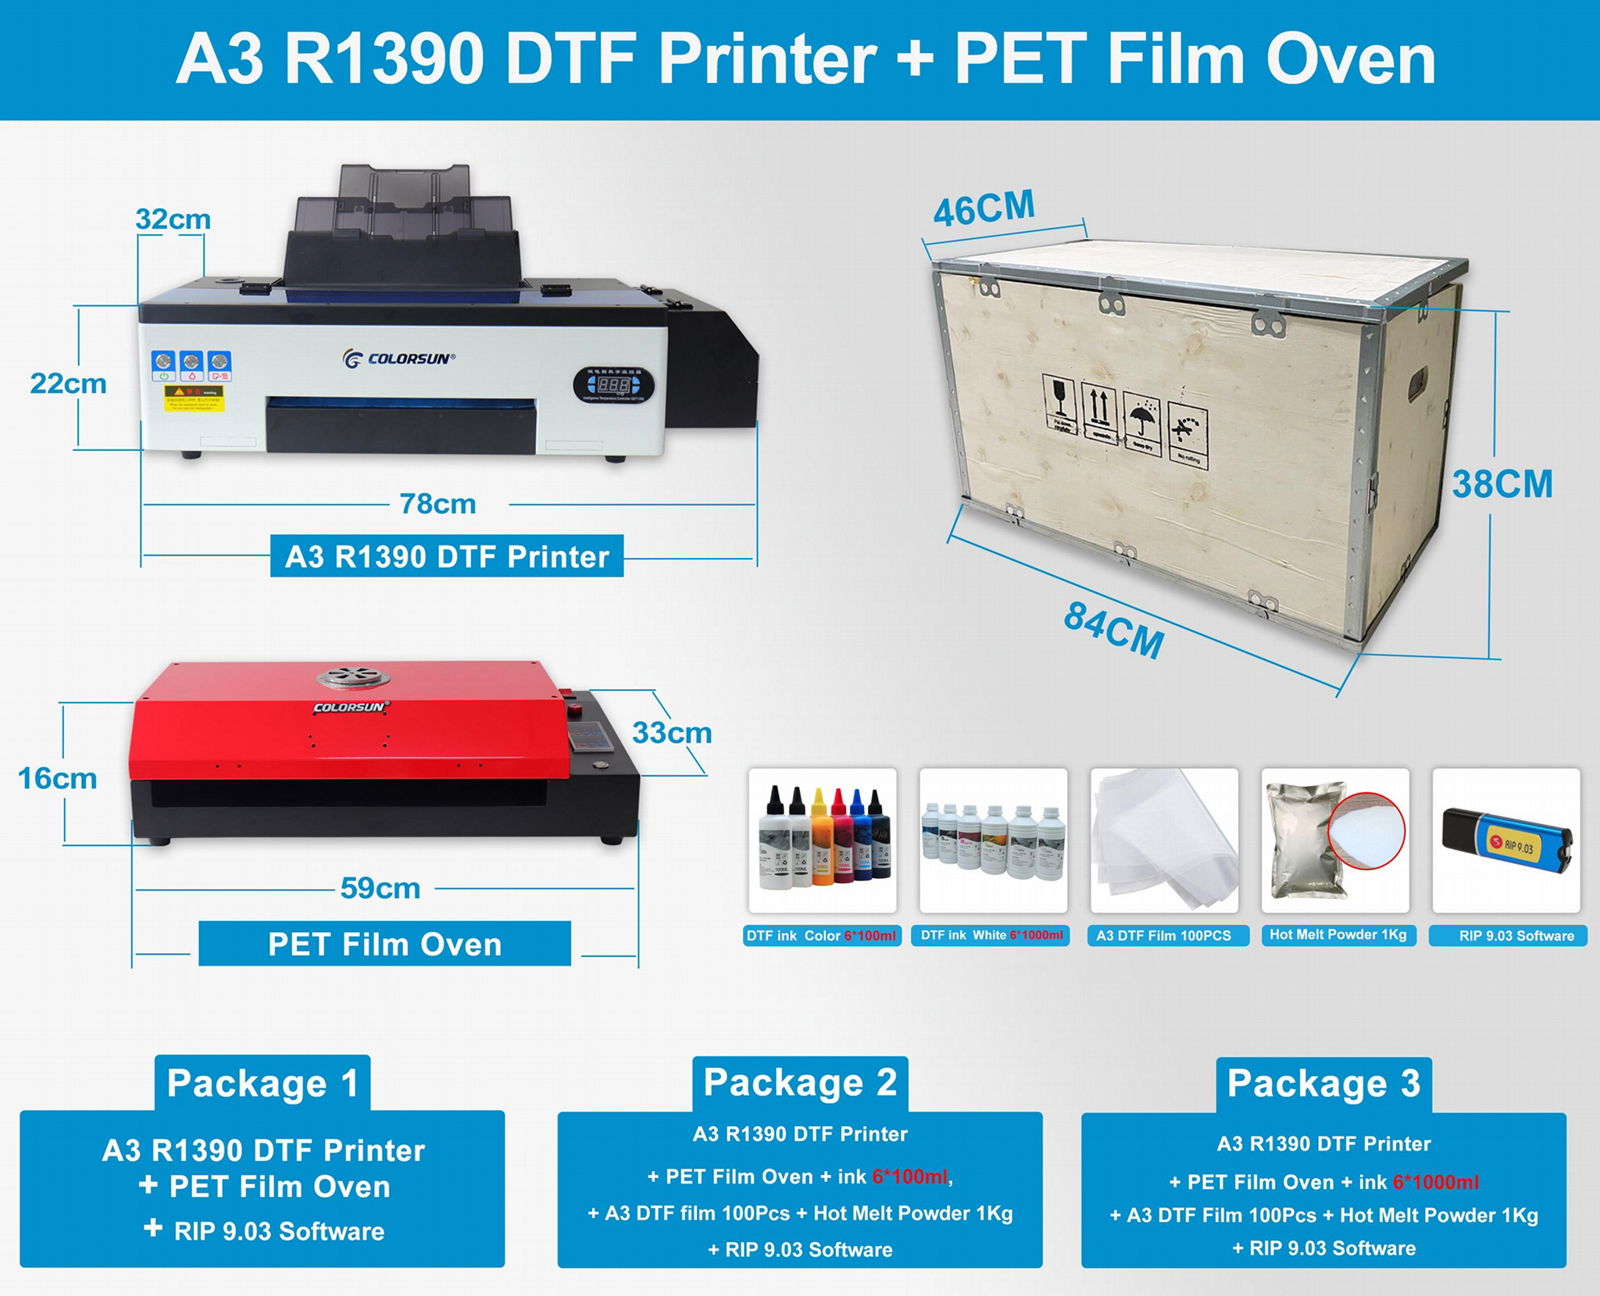 A3 R1390 DTF Printer  +  PET Film Oven   package price 4